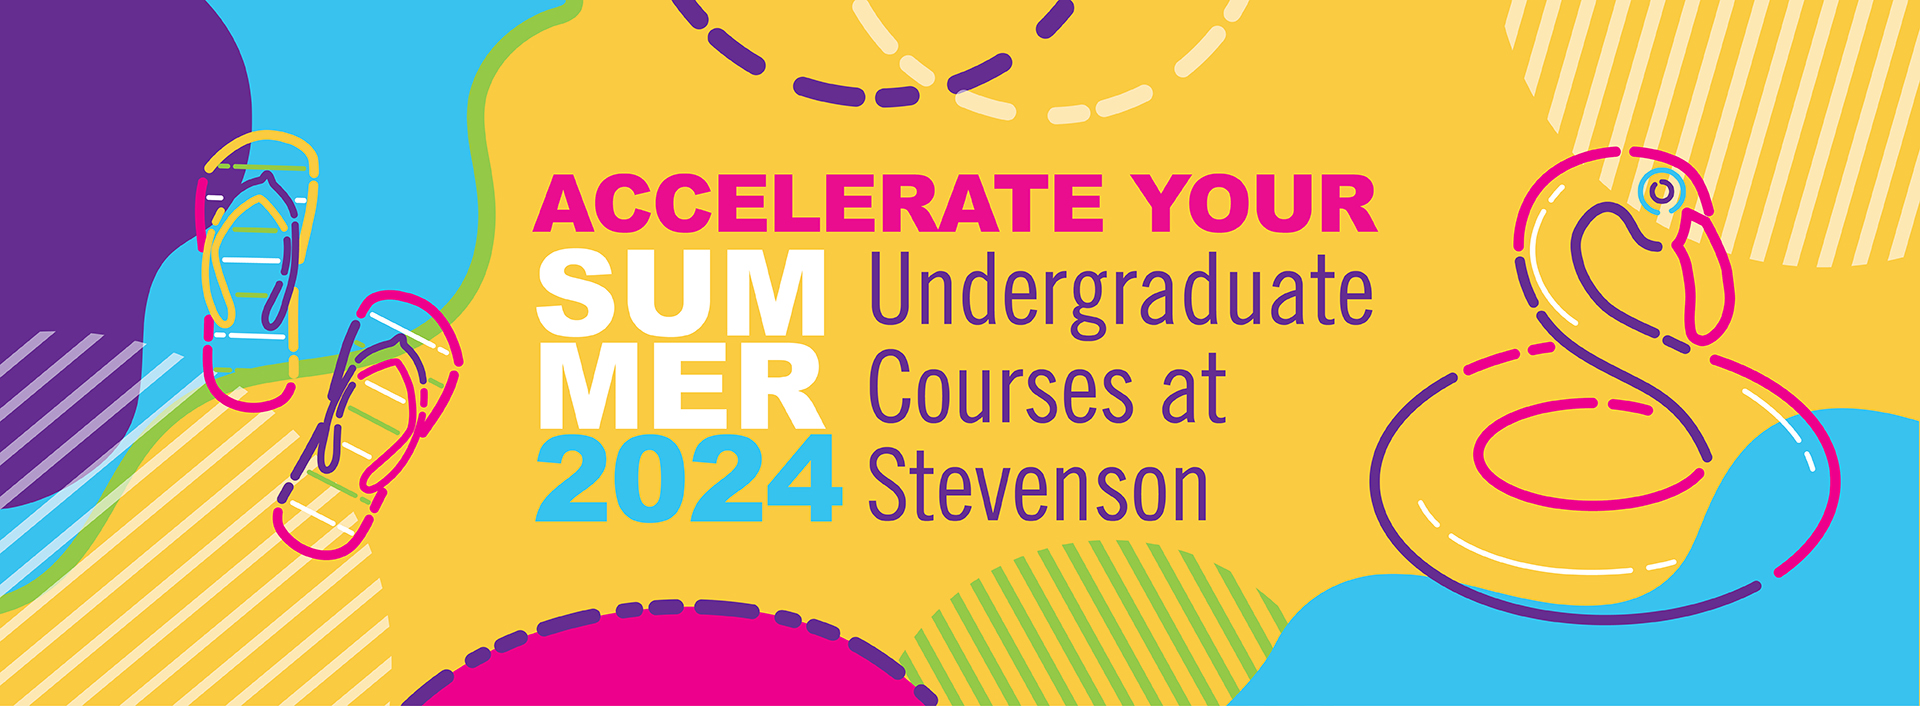 Accelerate Your Stevenson Education This Summer